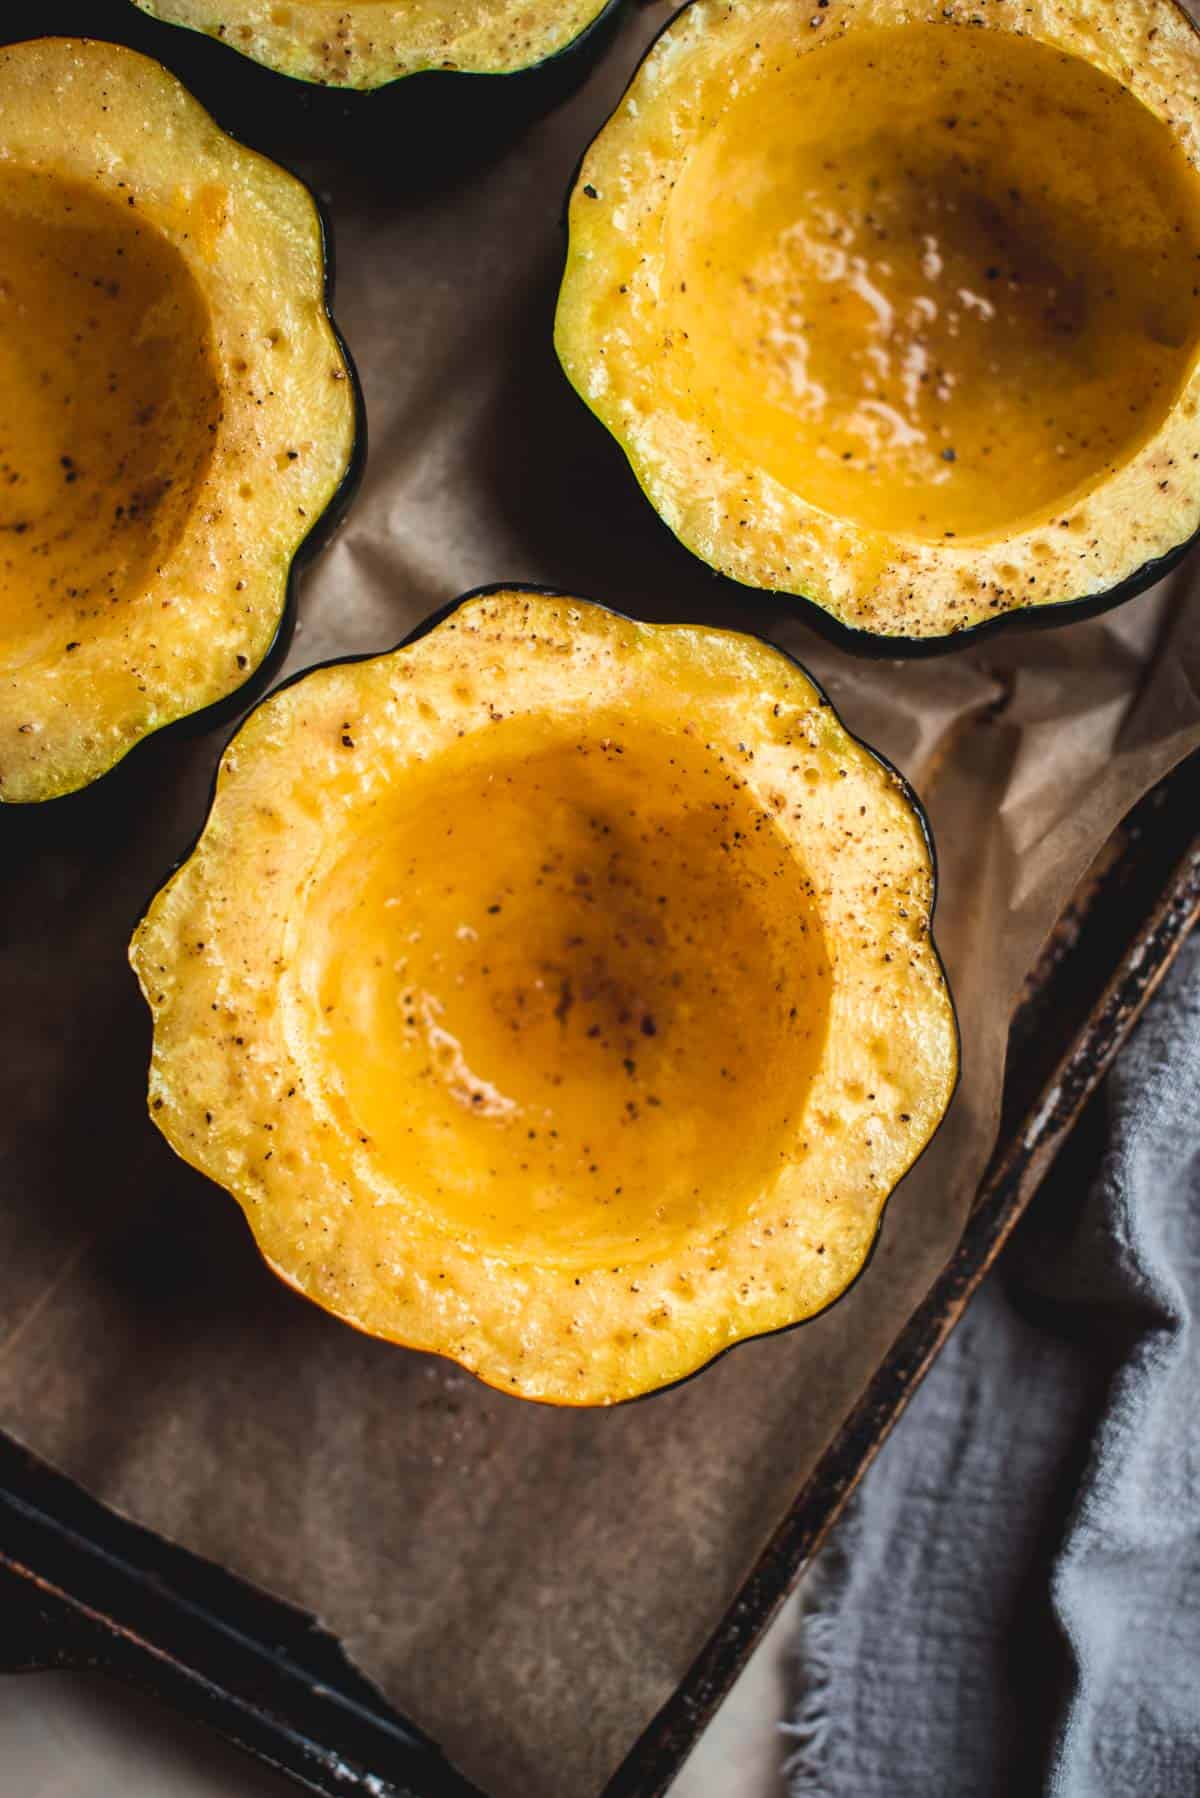 On a lined baking tray, 4 halves of acorn squash have been de-seeded and baked in the oven with olive oil on top.